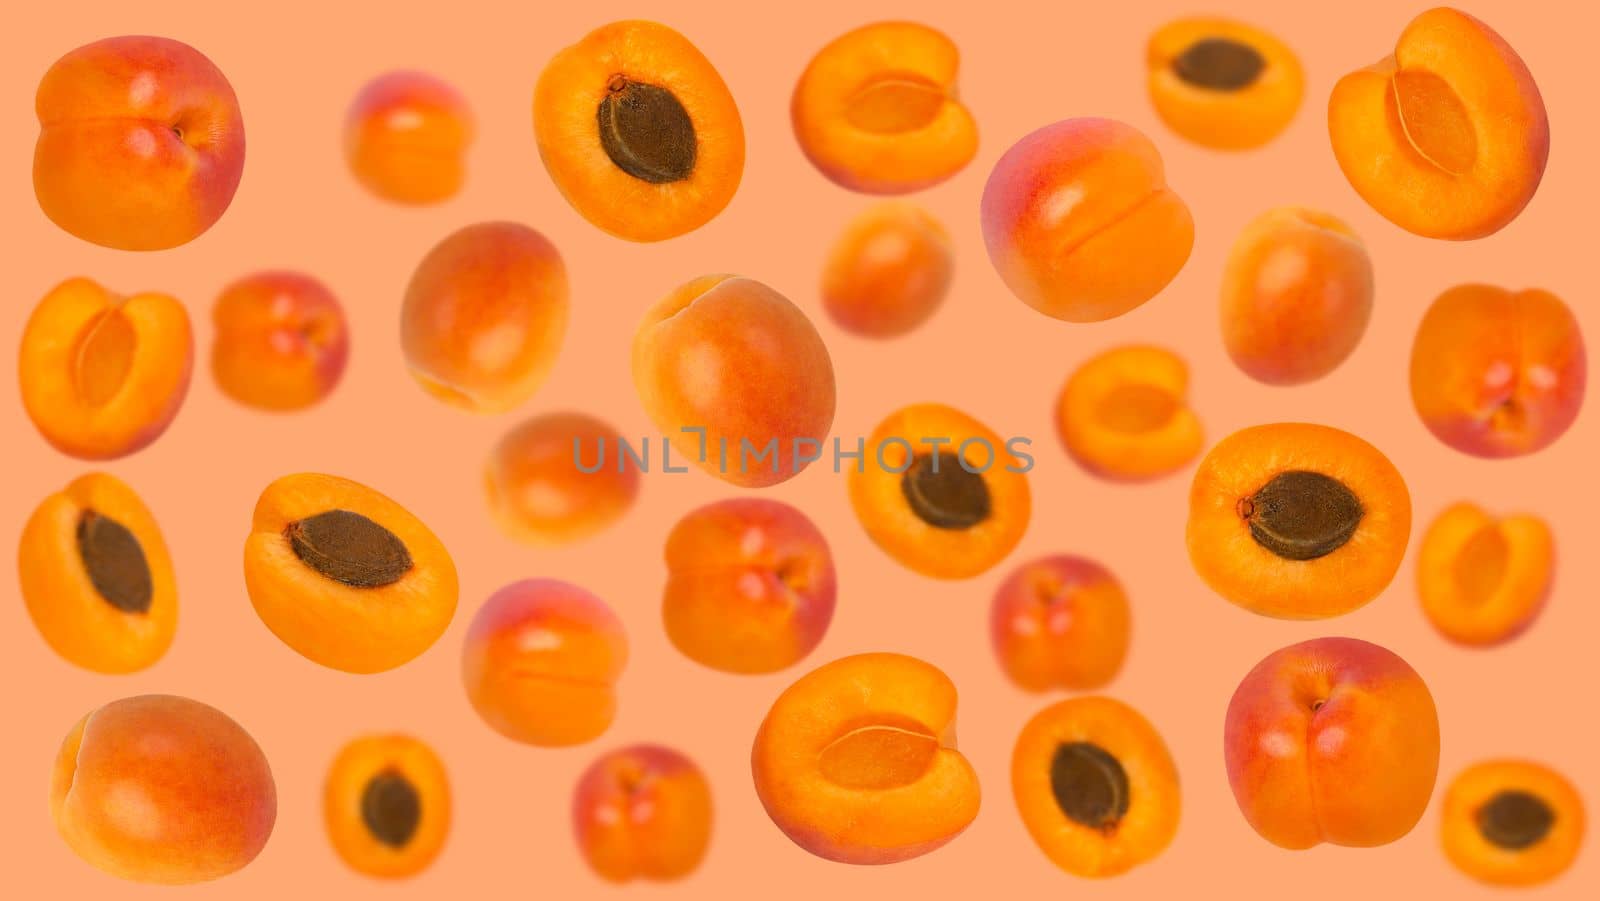 Creative levitation pattern with apricots. Selective focus. Isolated fruits. Packaging concept. Clip art image for package design.